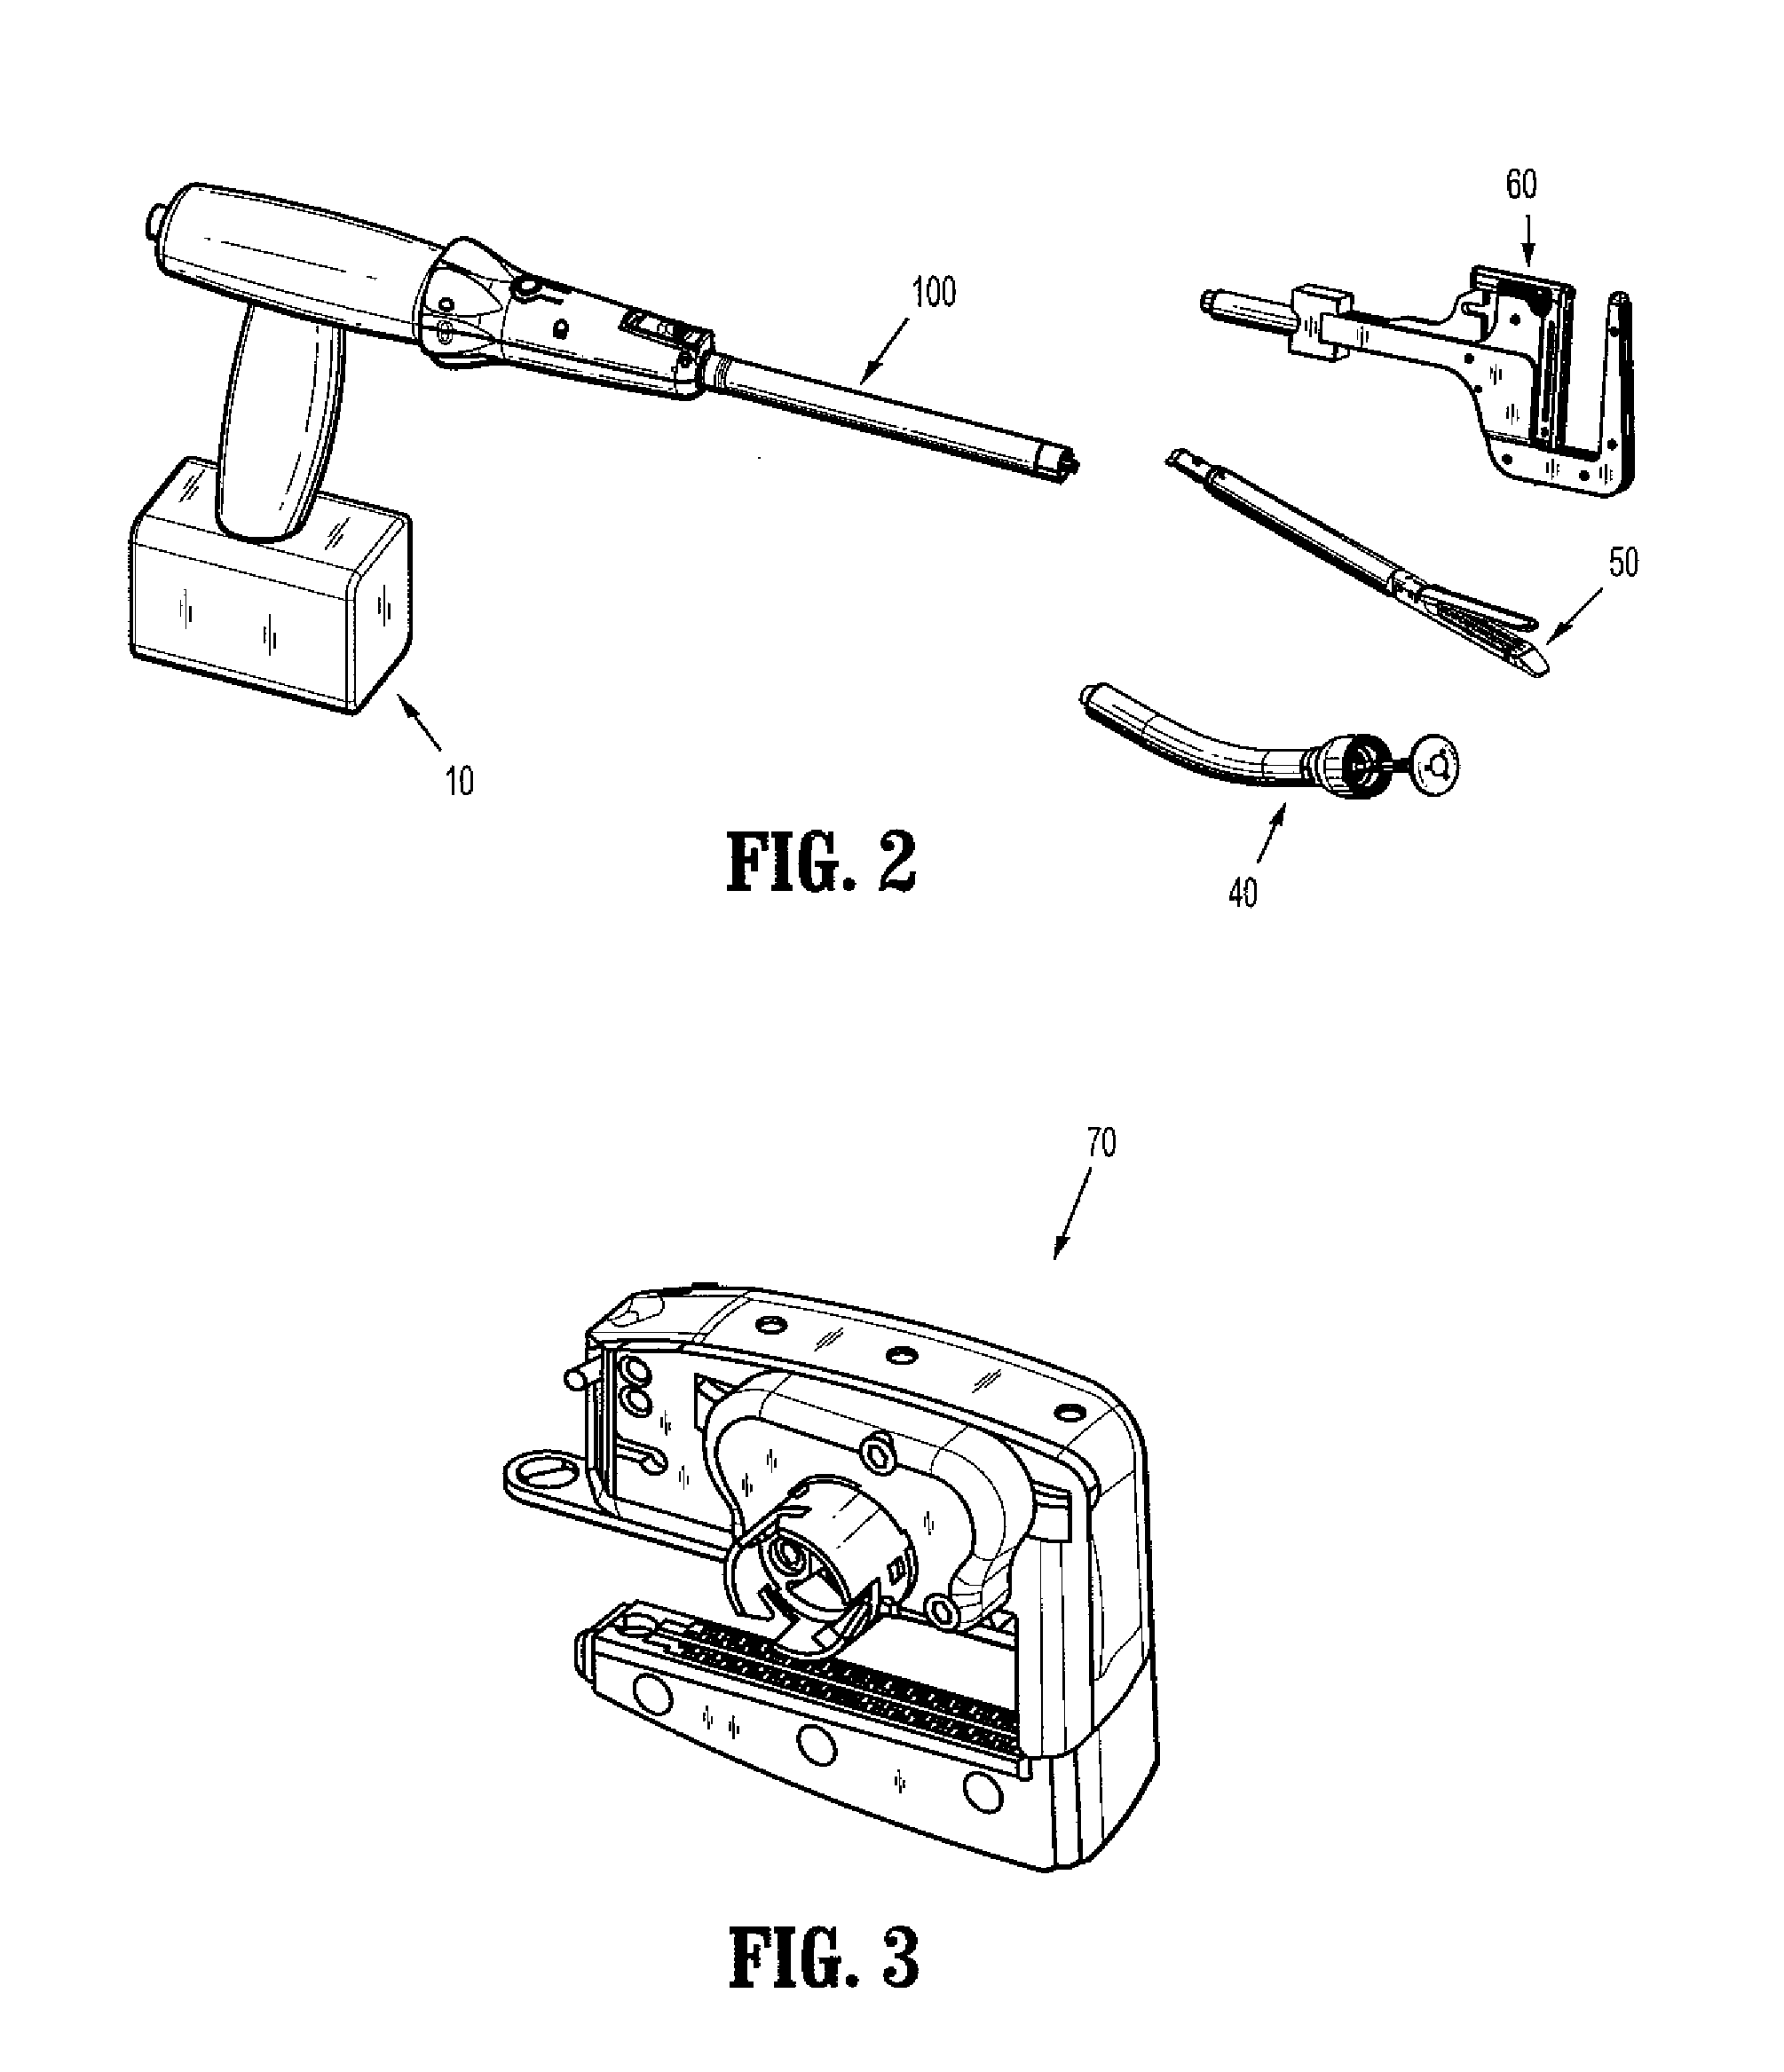 Adapter for powered surgical devices